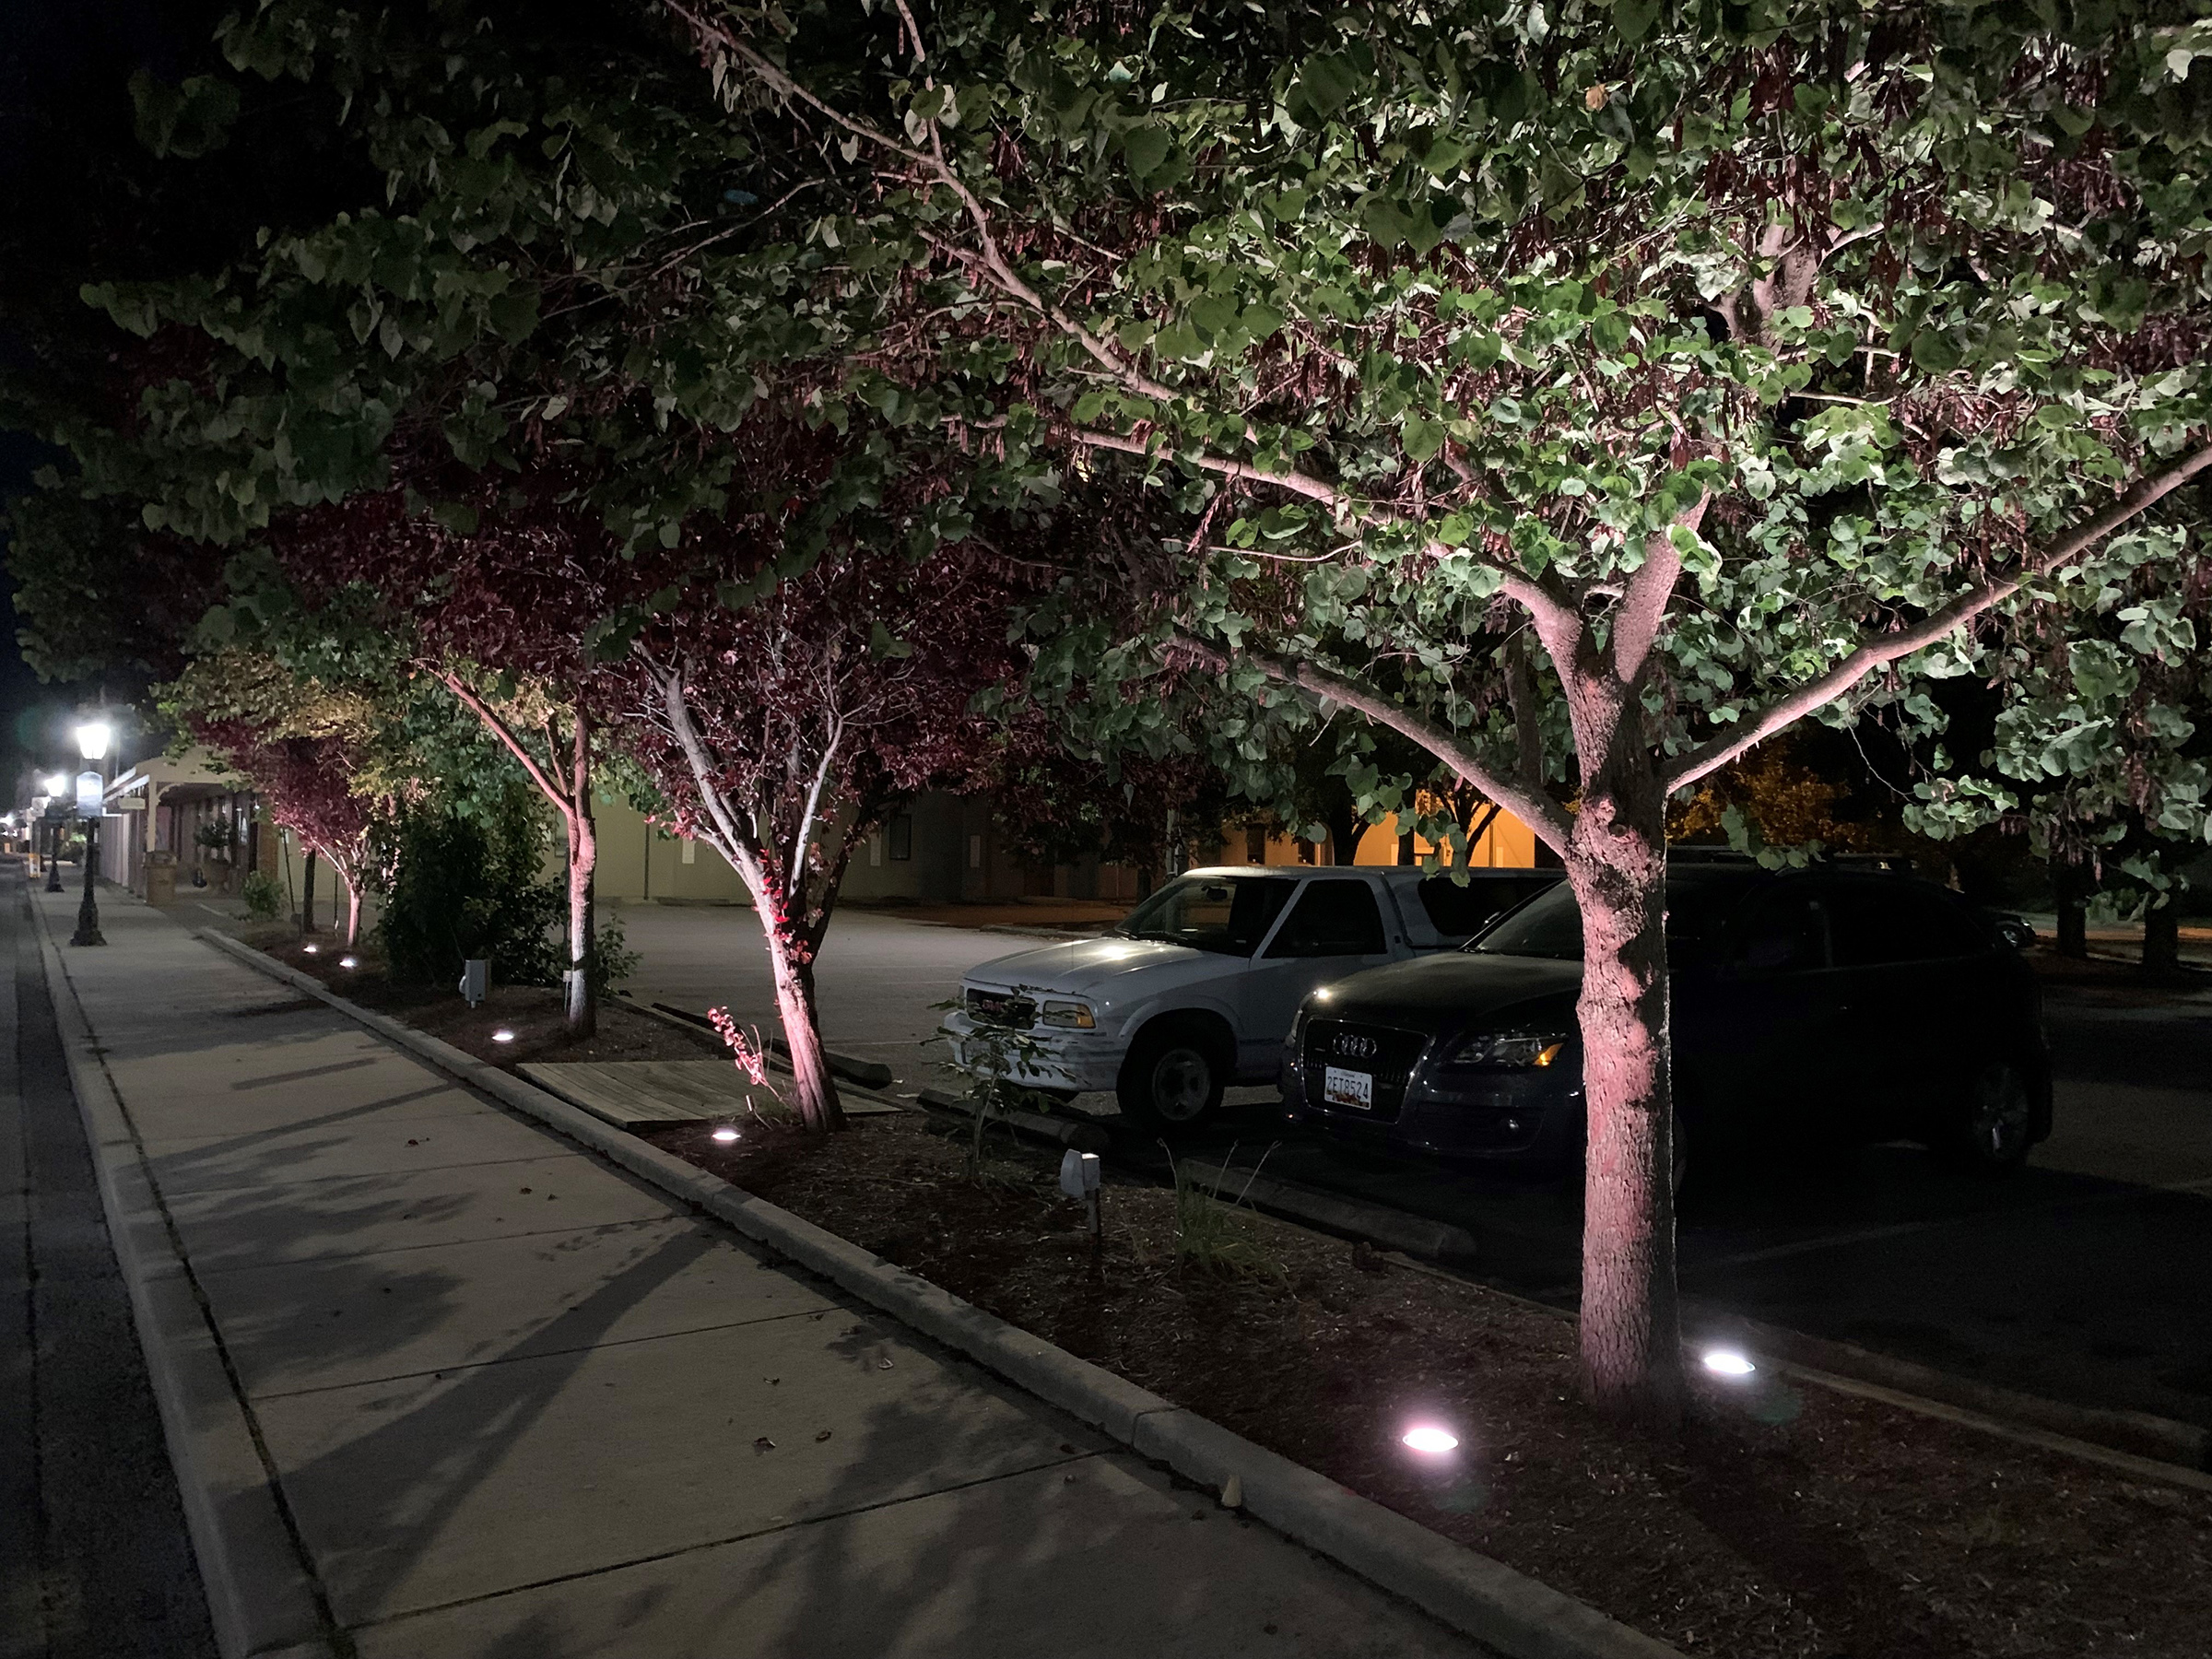 In 3-2 Council Vote, Berlin Will Return To Stringing Lights In Trees; Mayor Favored Uplighting Method